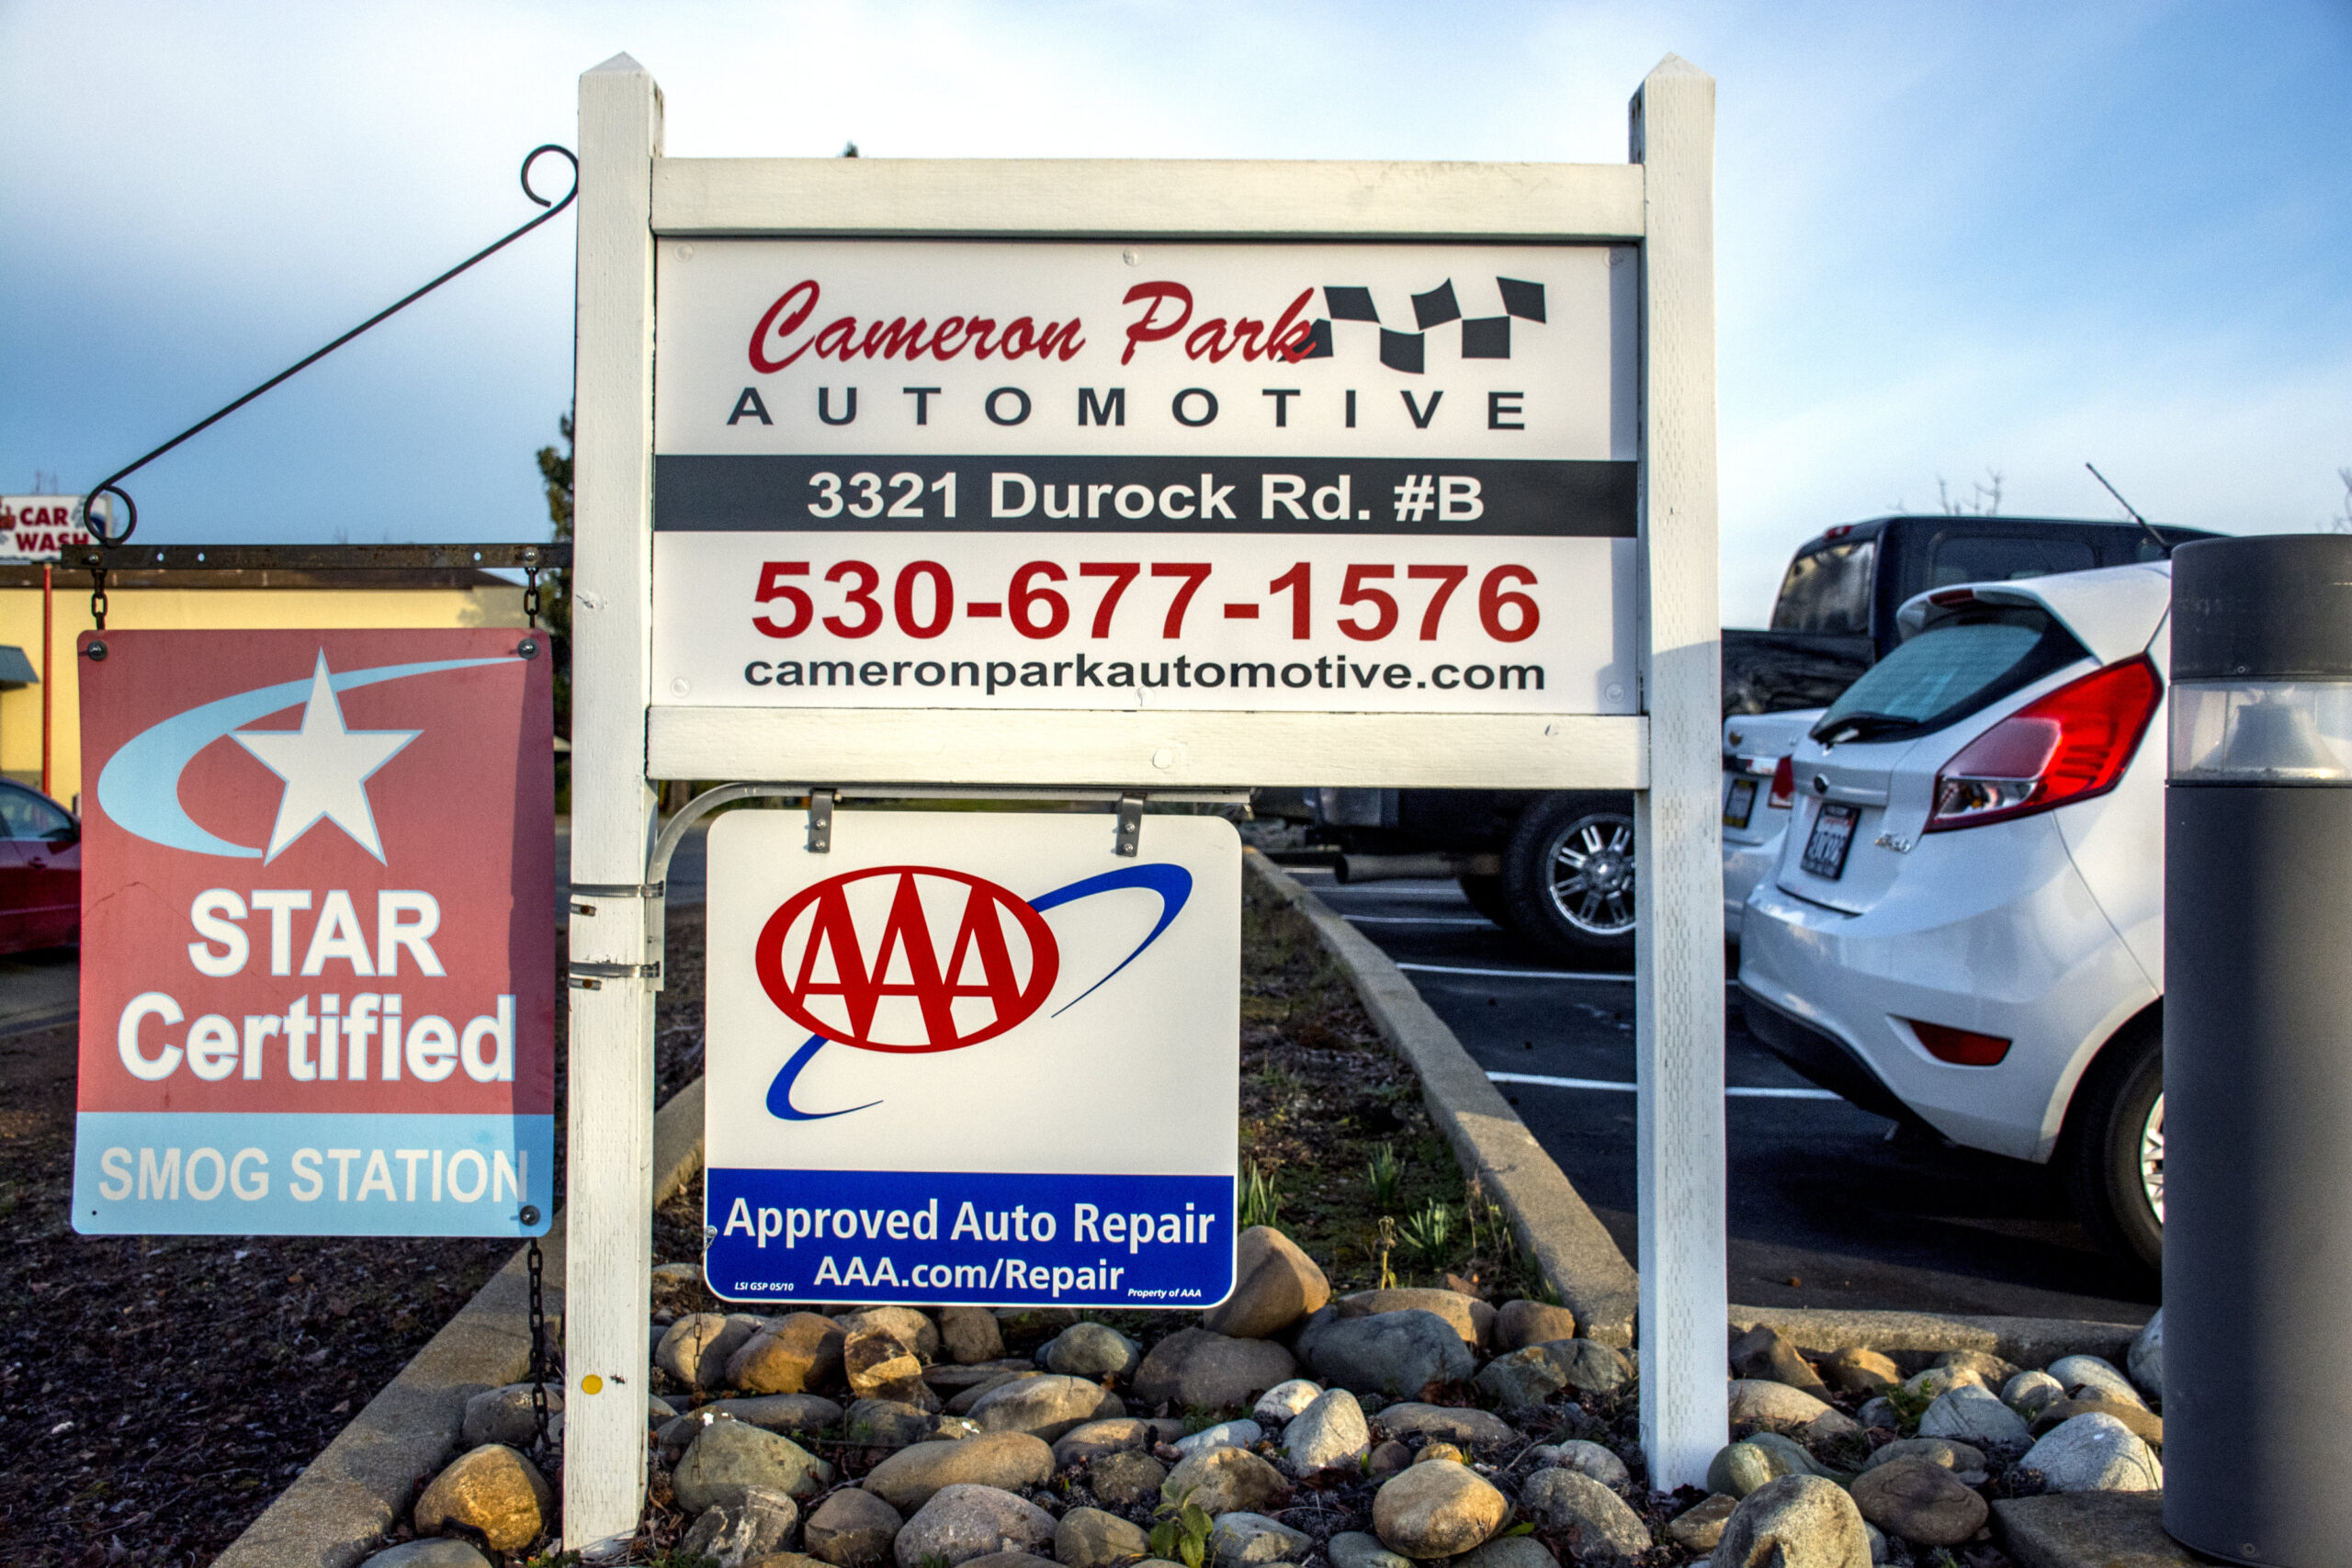 Cameron Park Automotive - AAA Approved Auto Repair - Star Certified Smog